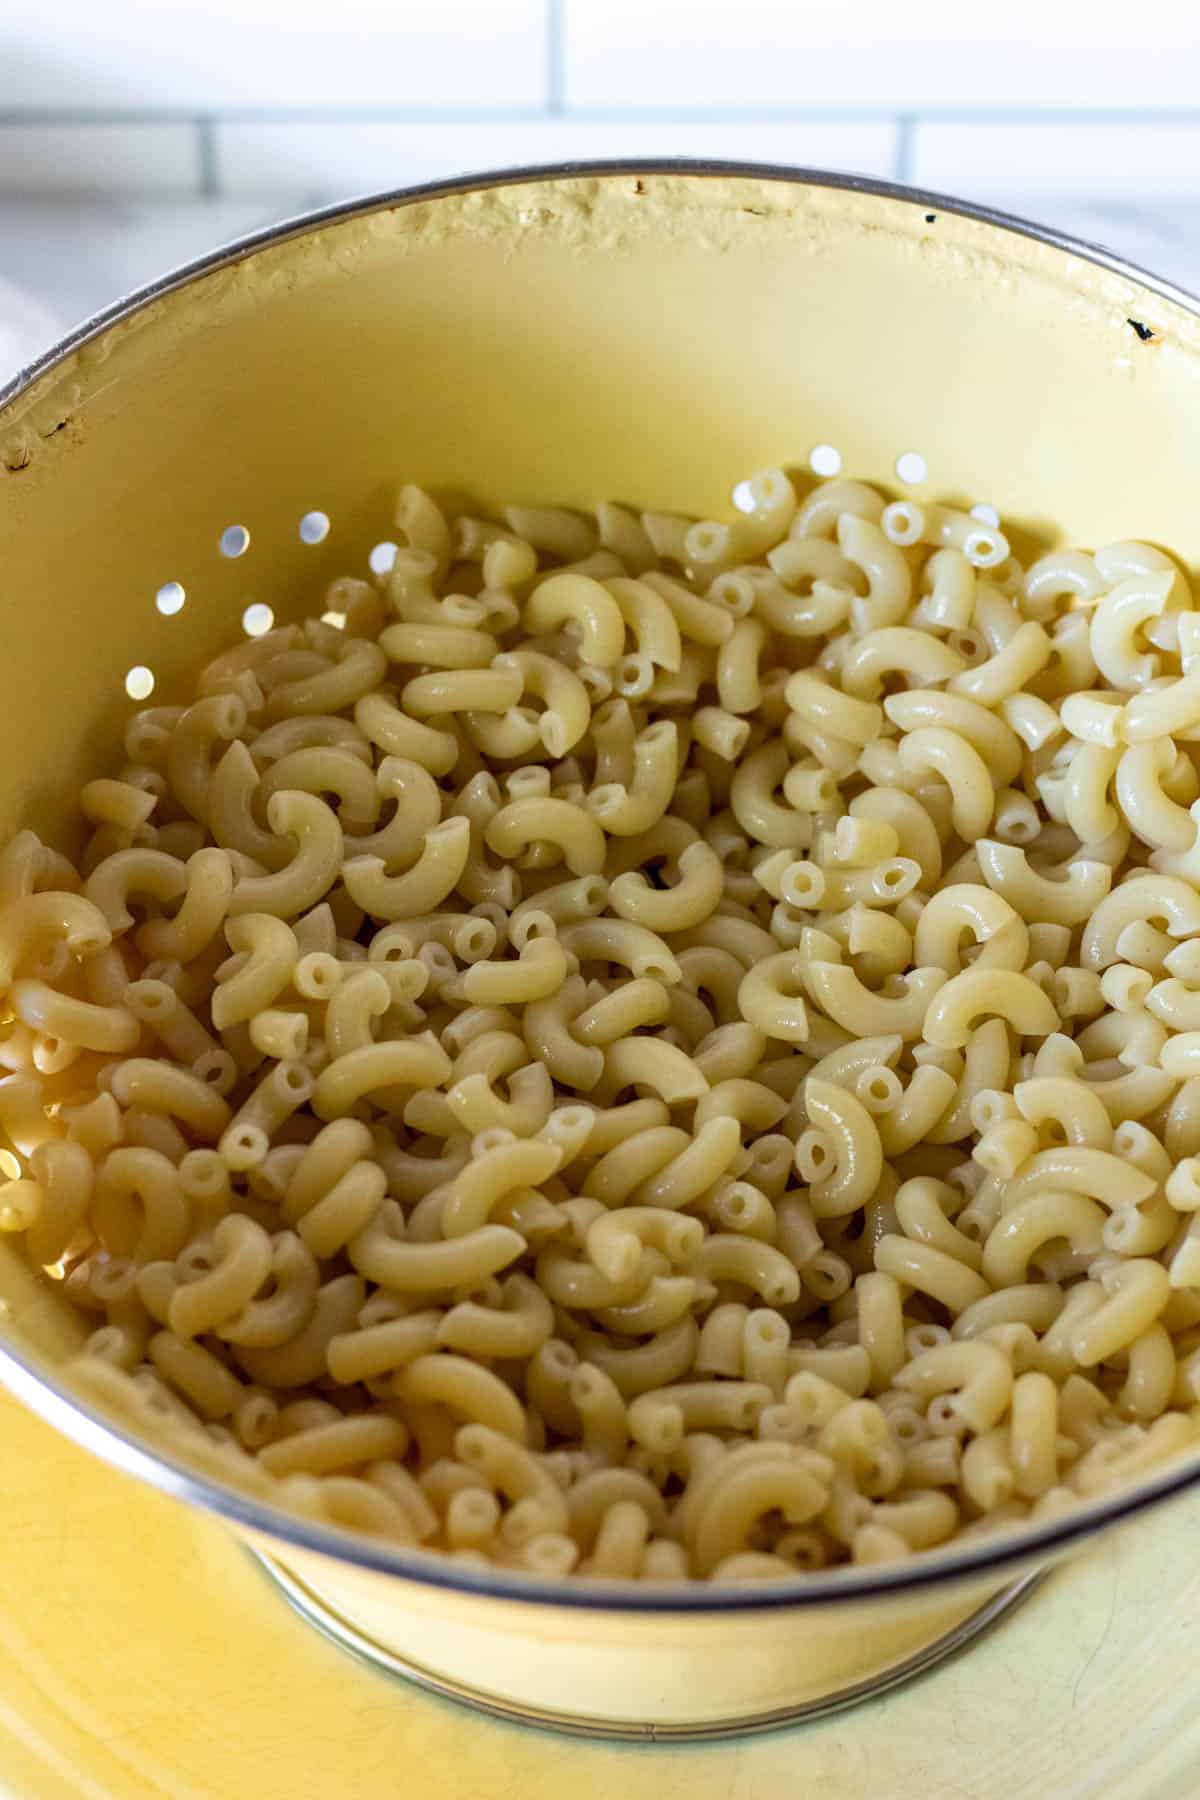 Cooked macaroni draining in yellow colander.